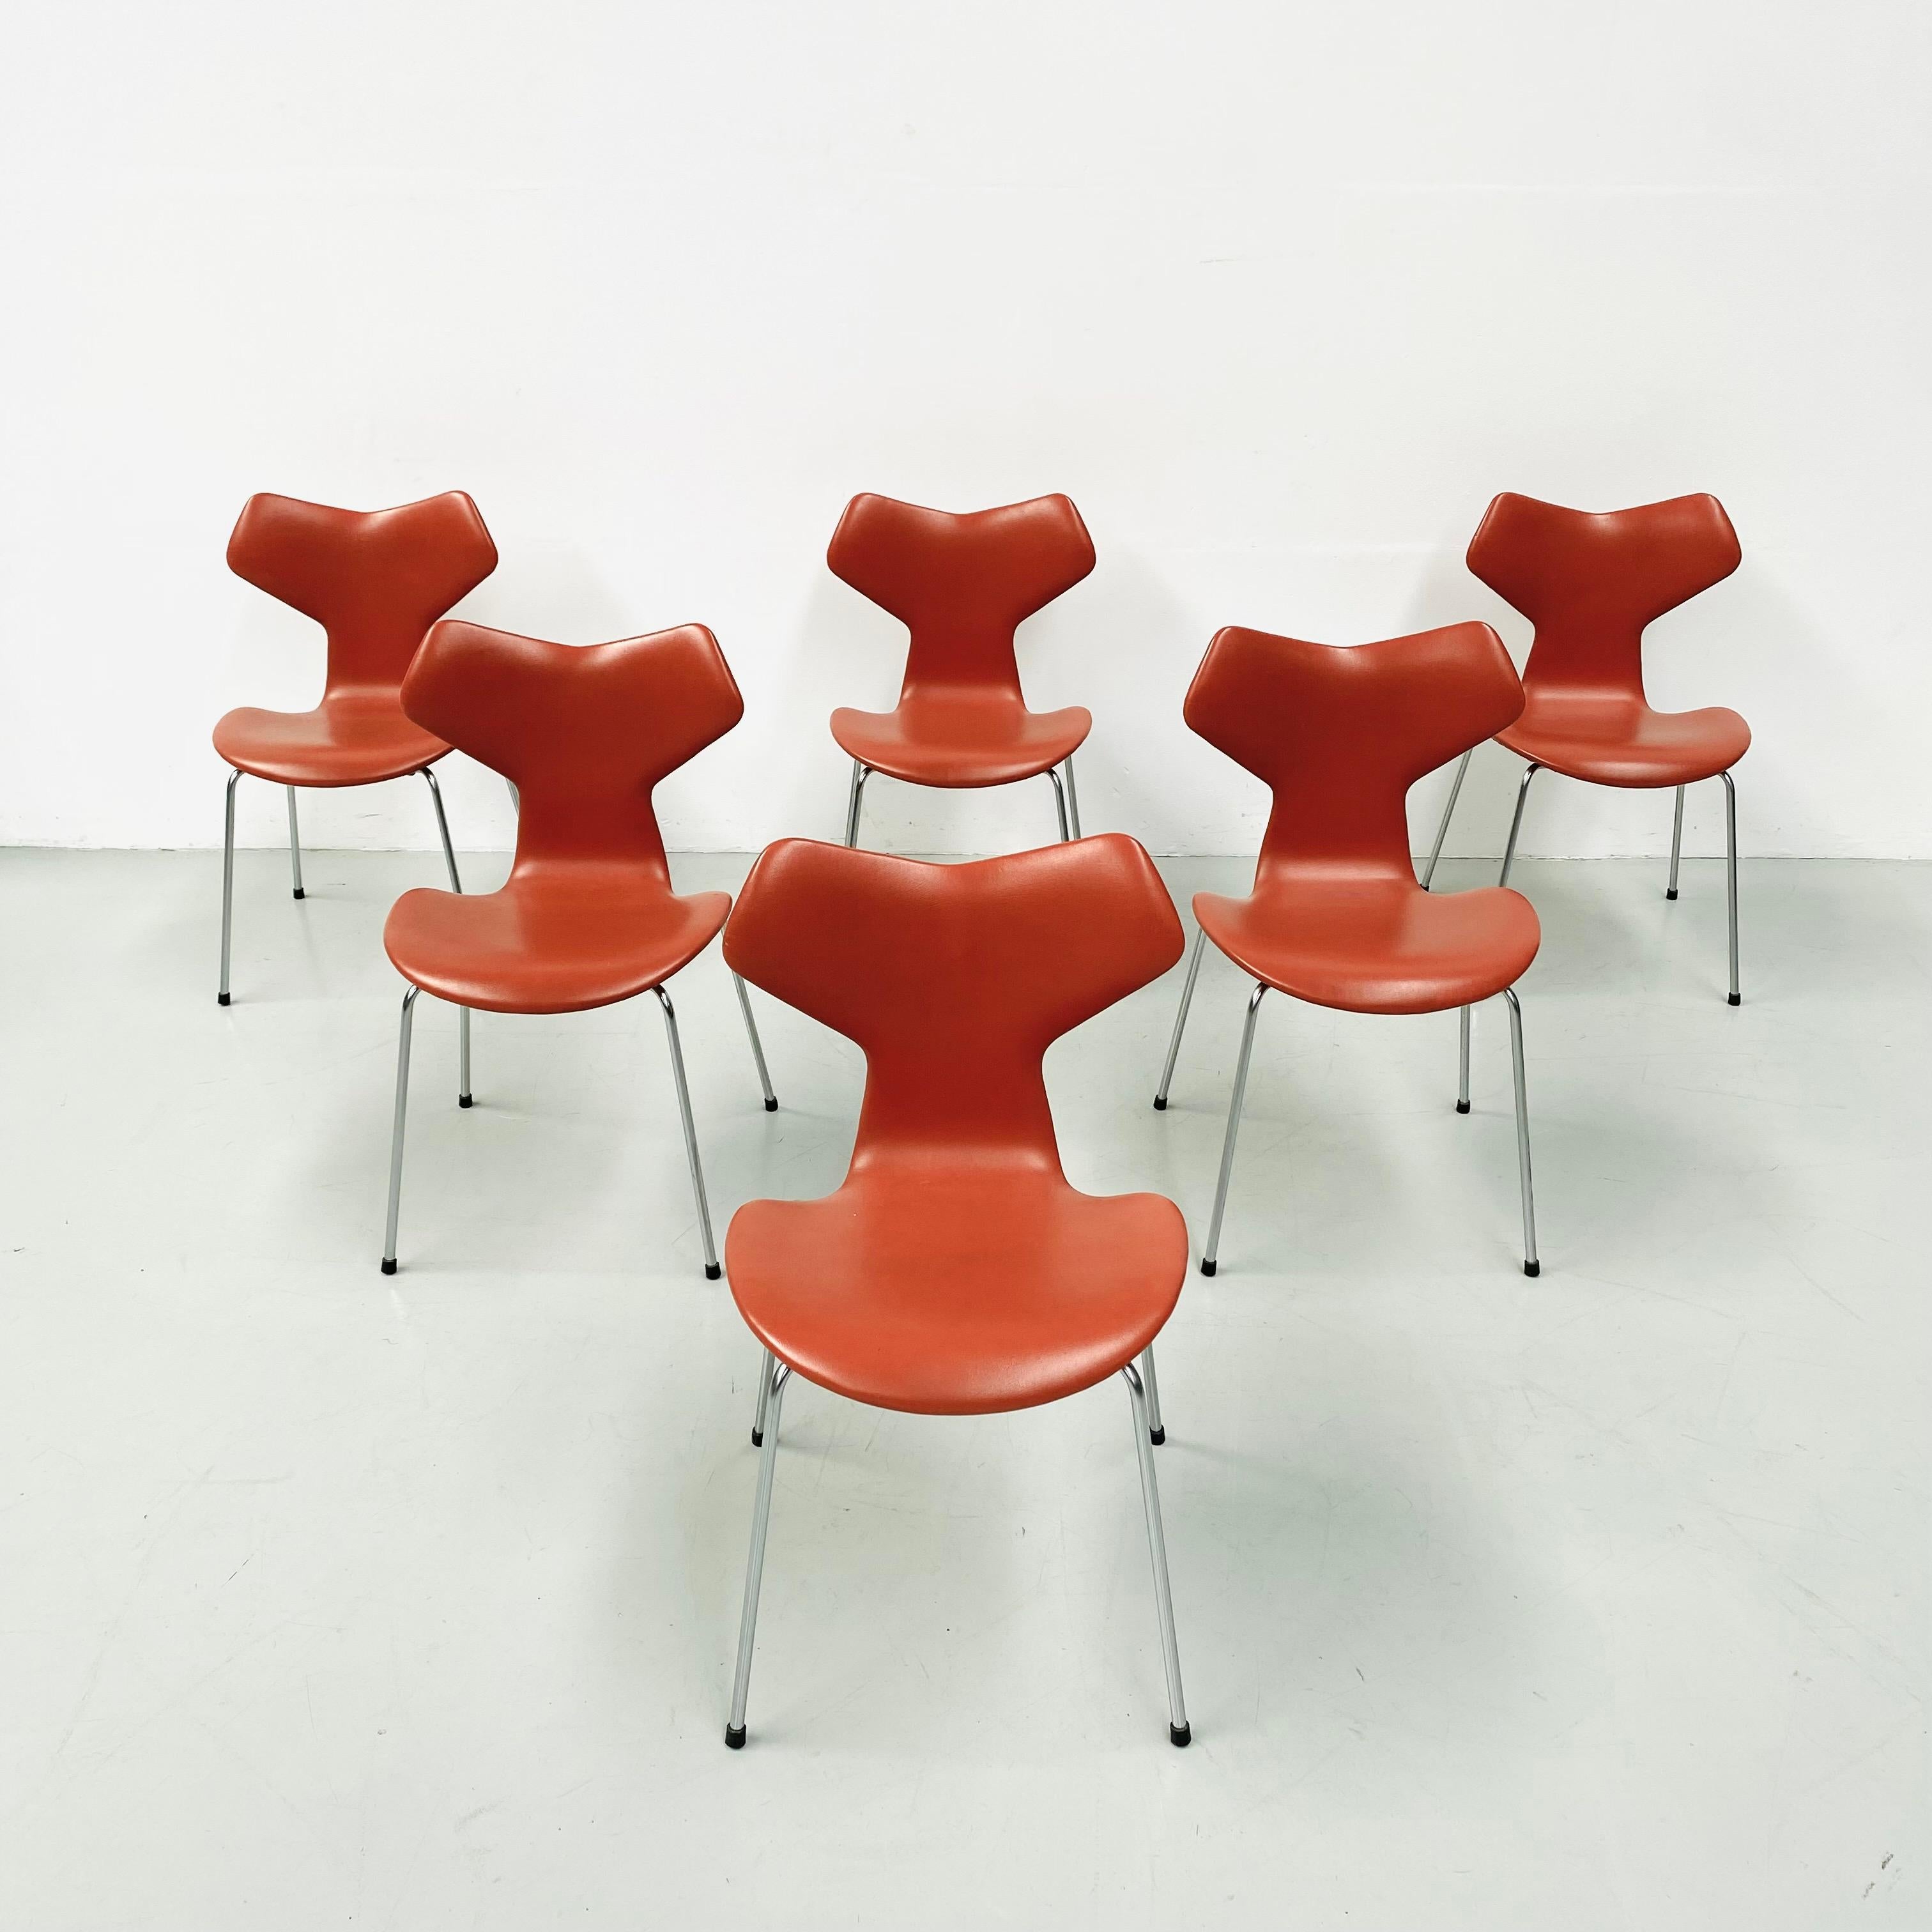 These 6 Grand Prix chairs are designed in the fifties by Arne Jakobson for the Danish company Fritz Hansen.
 The Grand Prix chair was designed in 1955 and introduced at the Designers’ Spring Exhibition at the Danish Museum of Art & Design in 1957.